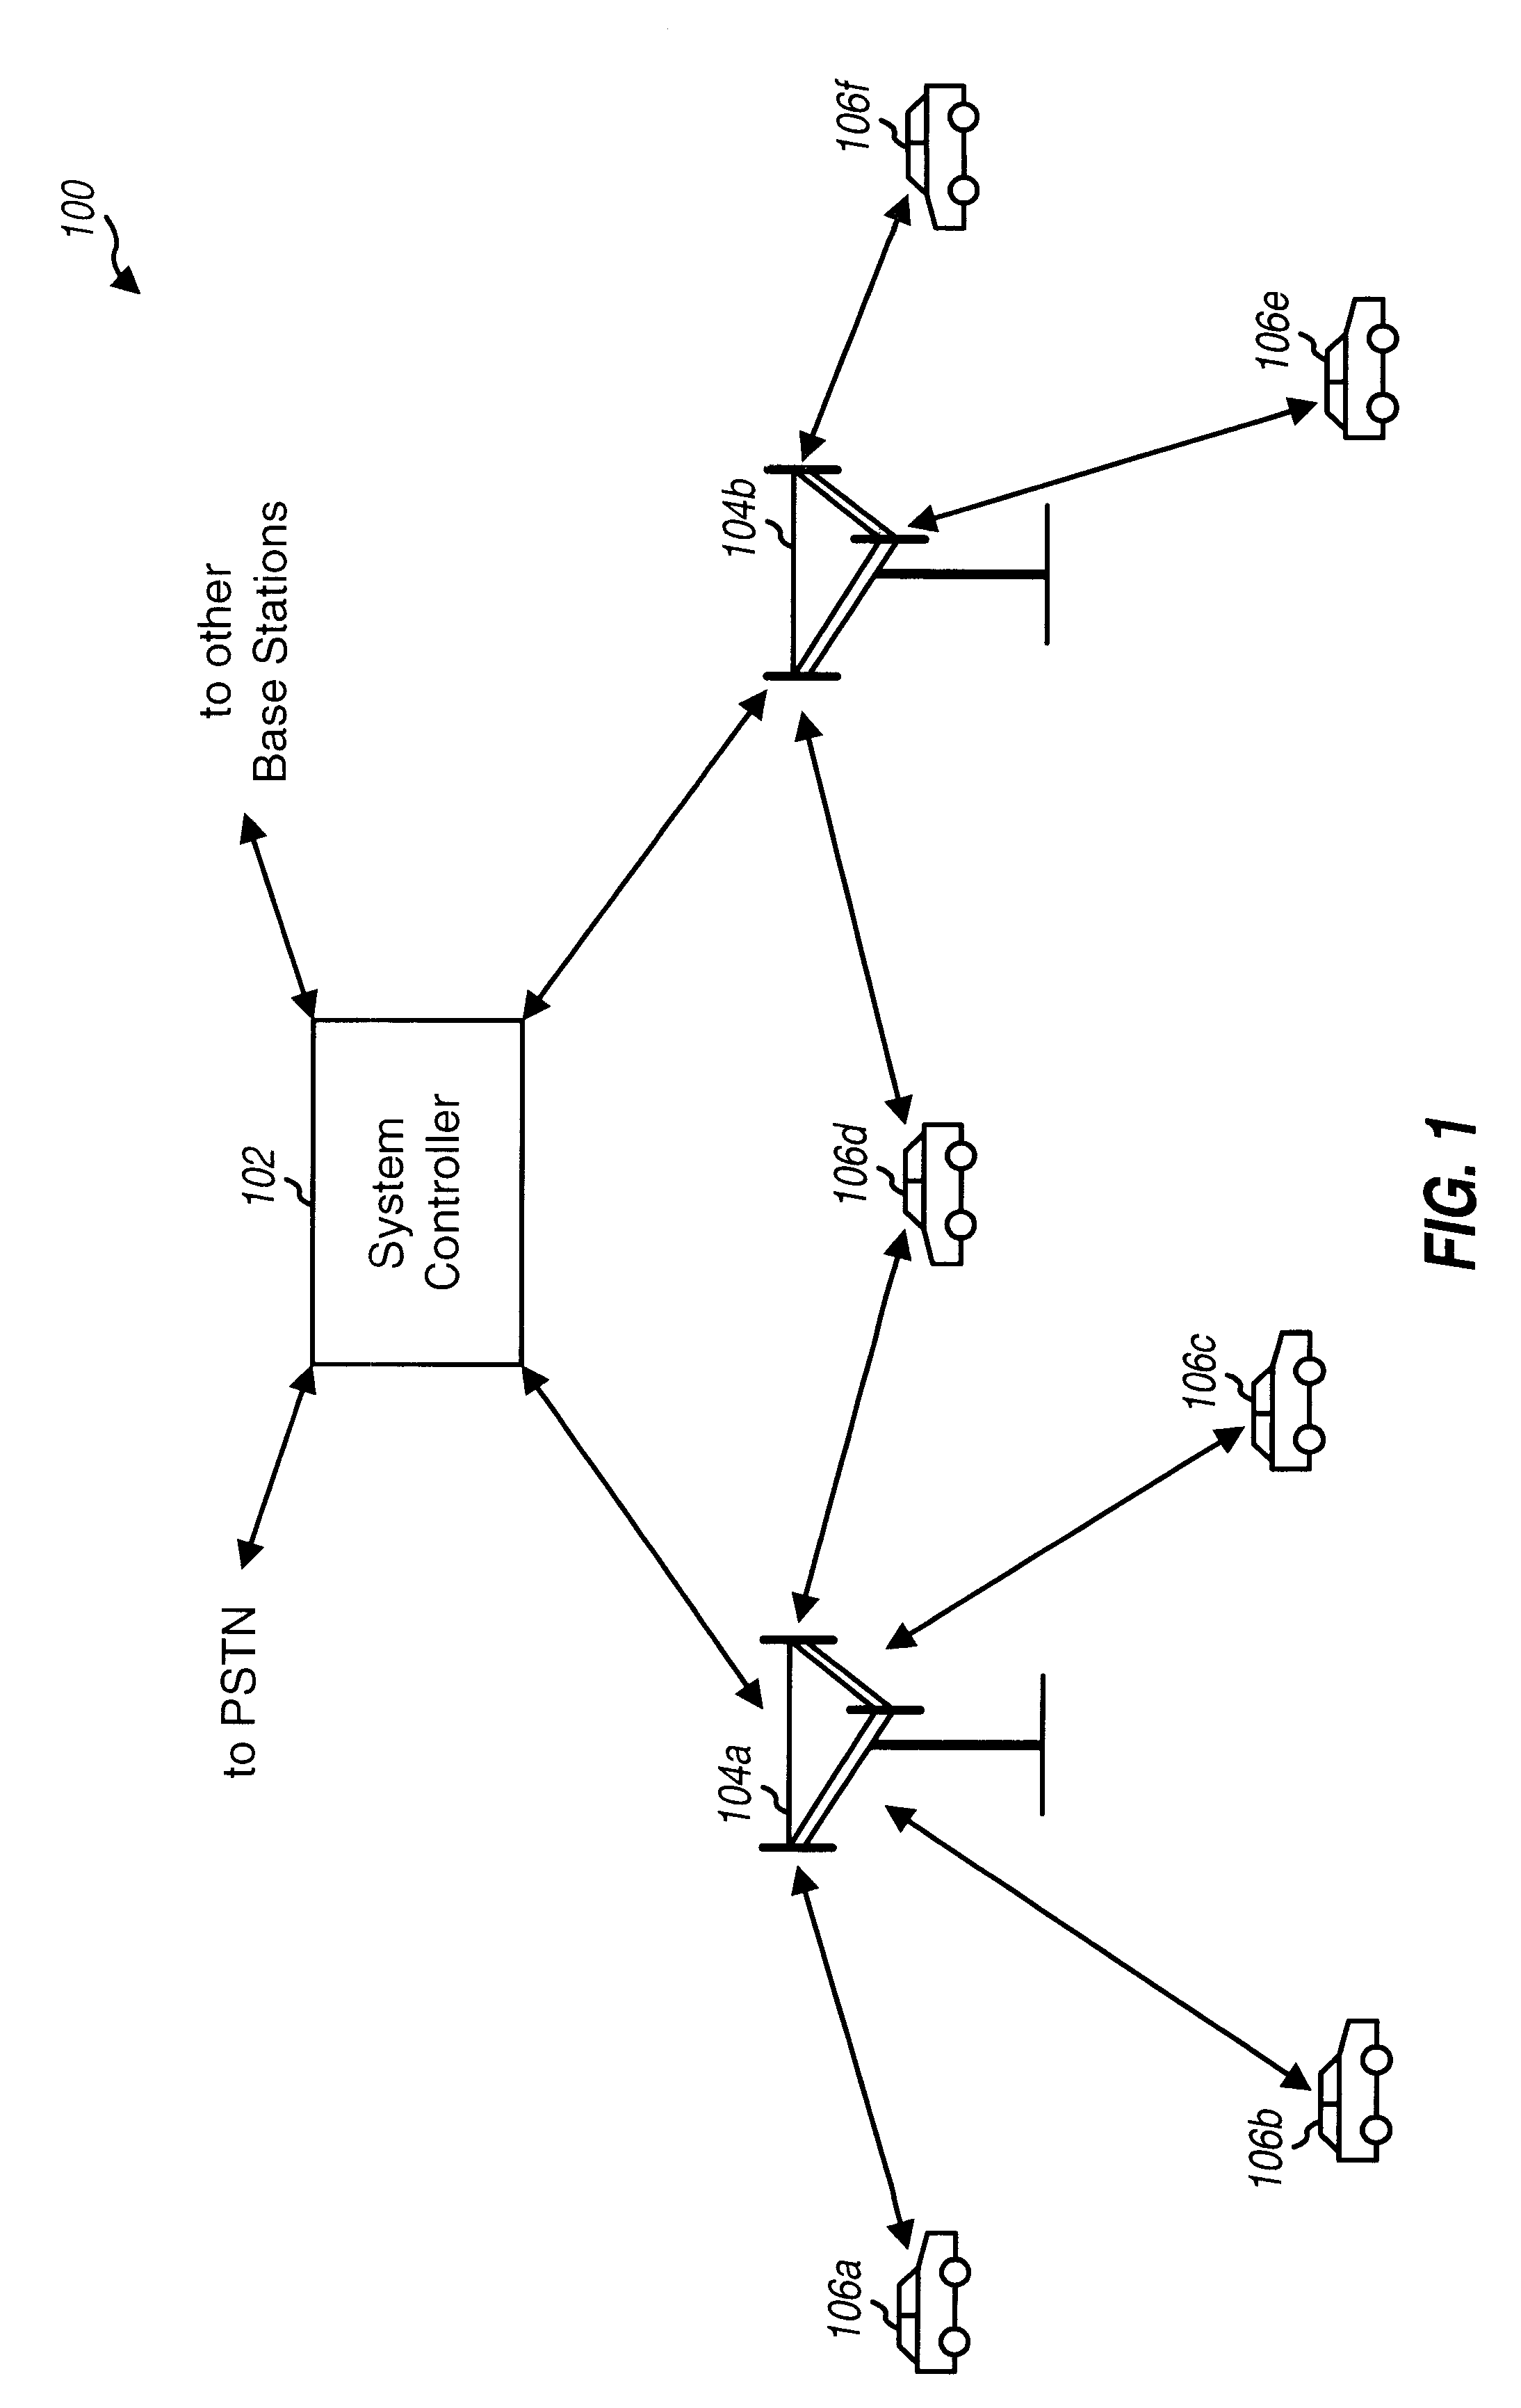 Method and apparatus for testing wireless communication channels